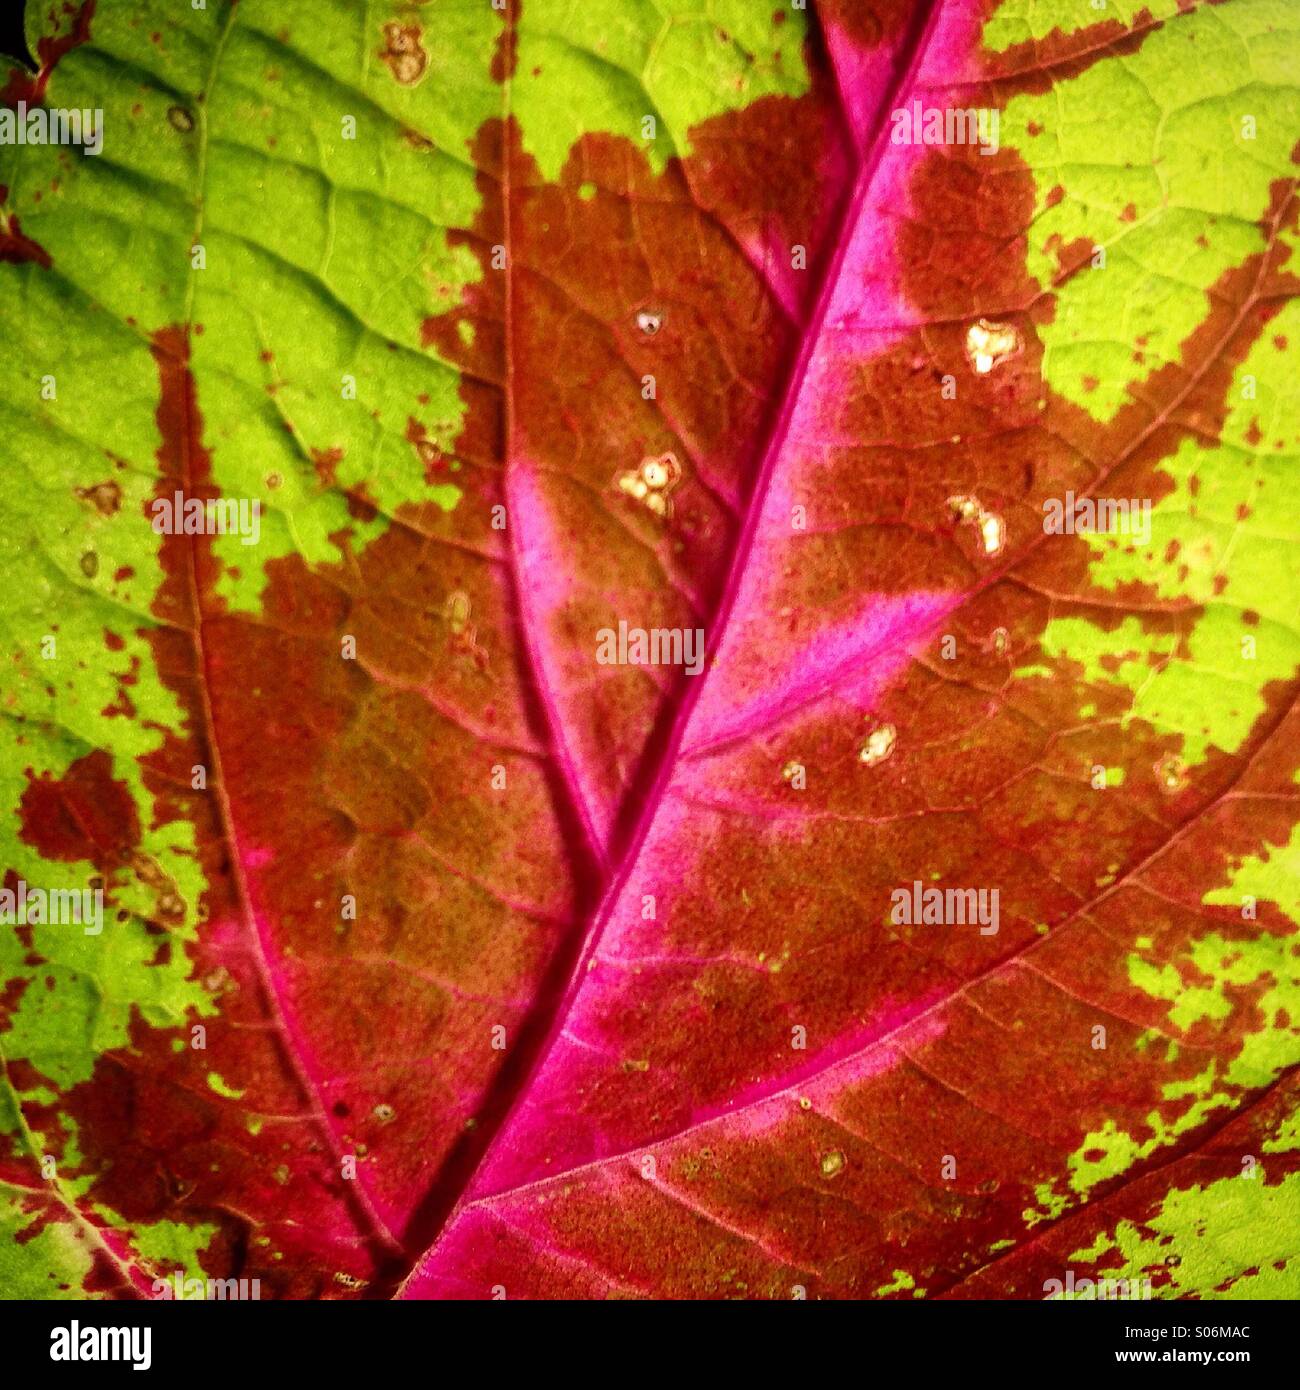 Detail of a leaf with purple veins in Colonia Roma, Mexico City, Mexico Stock Photo